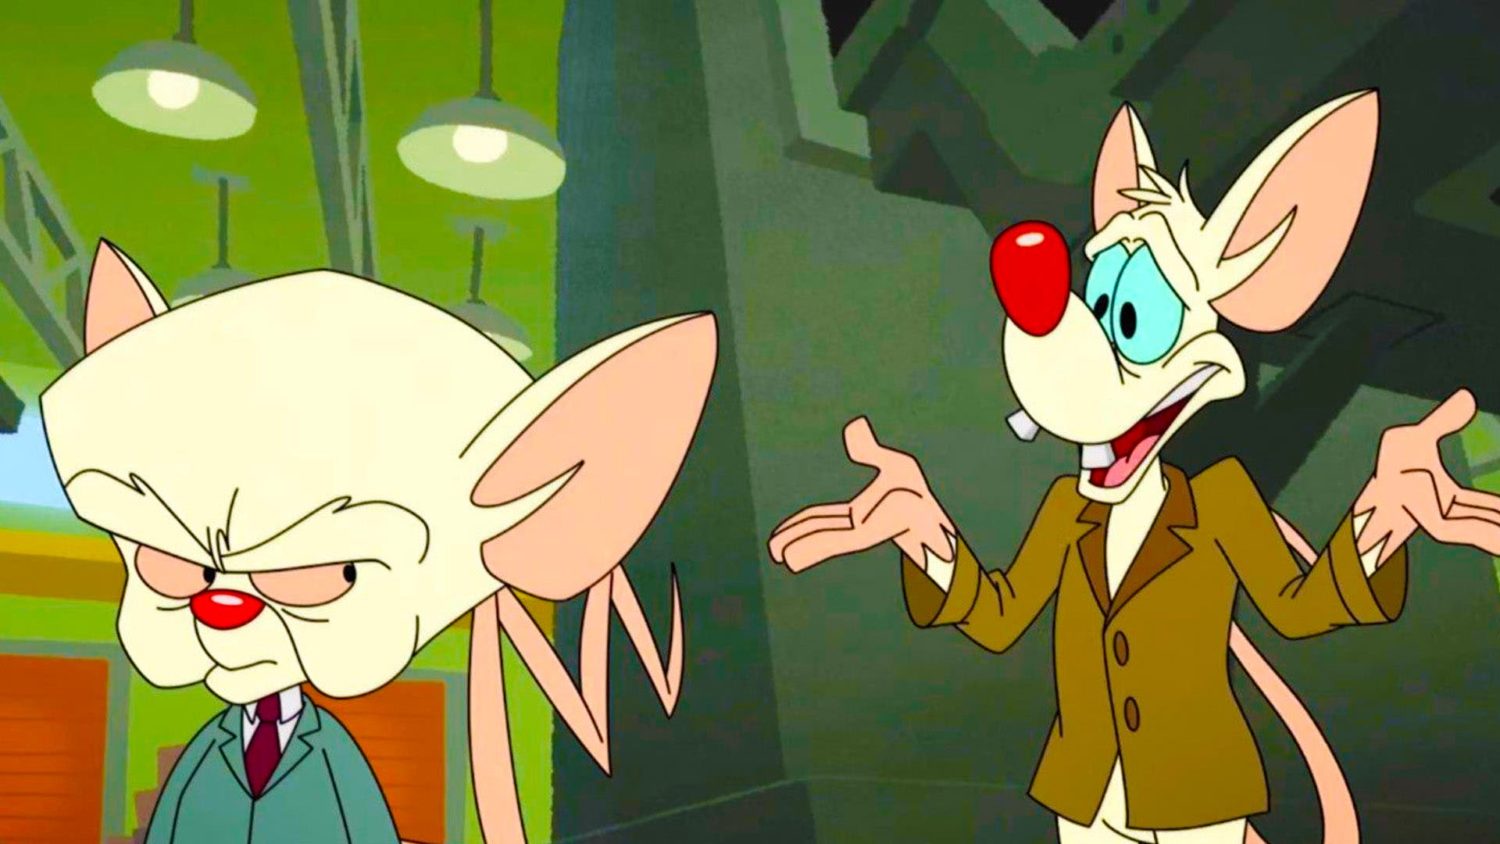 Pinky and the Brain looky dapper in suits